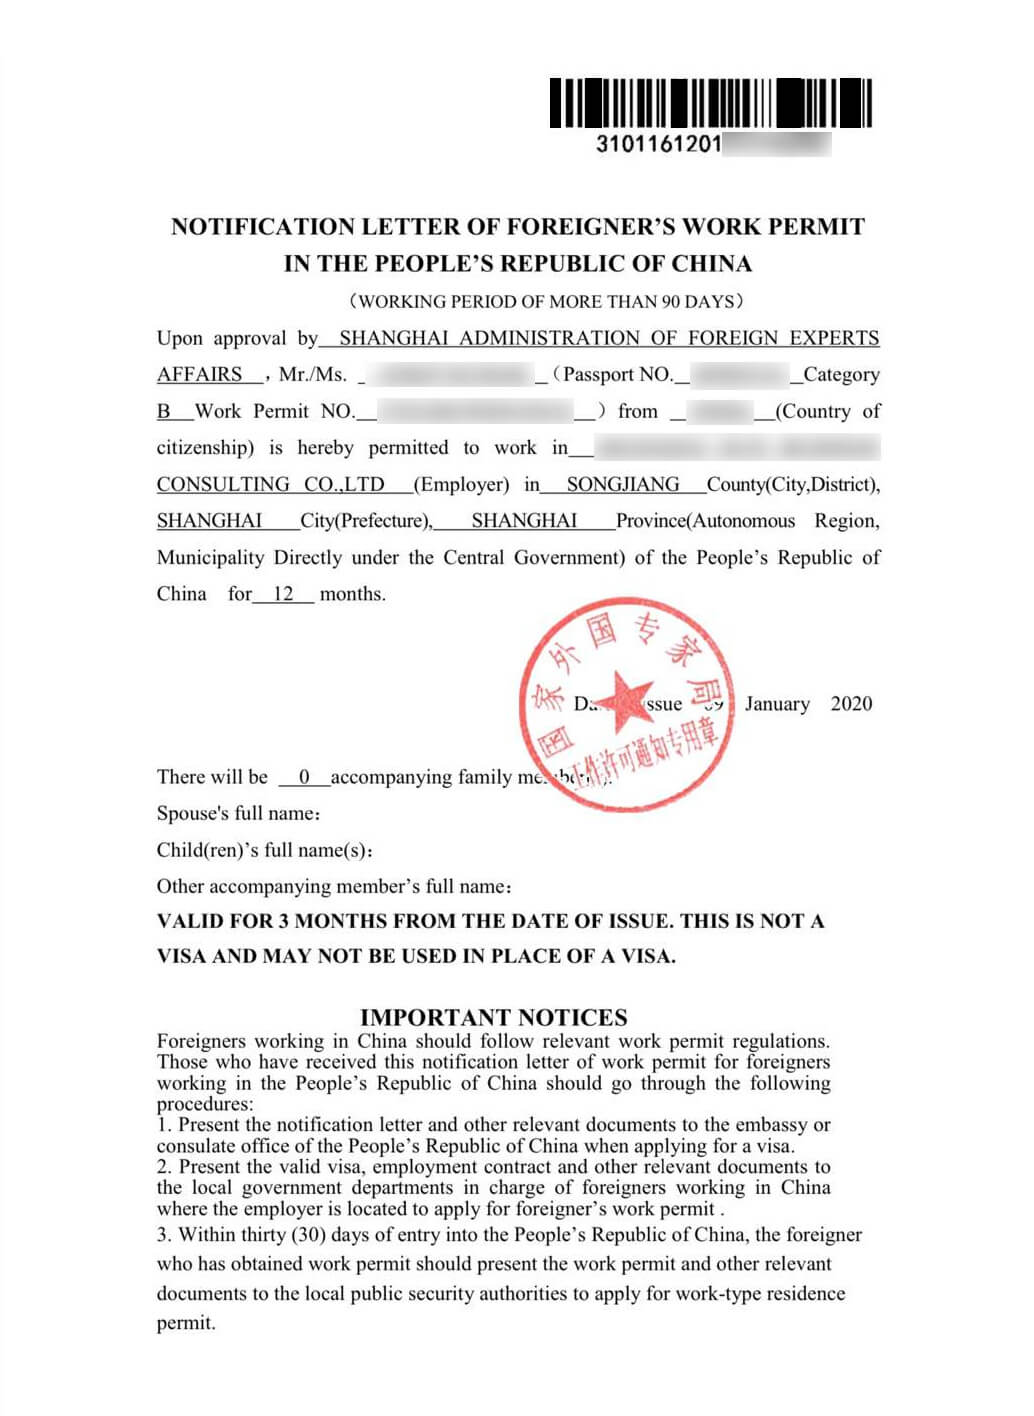 Notification letter of Foreigner' work permit